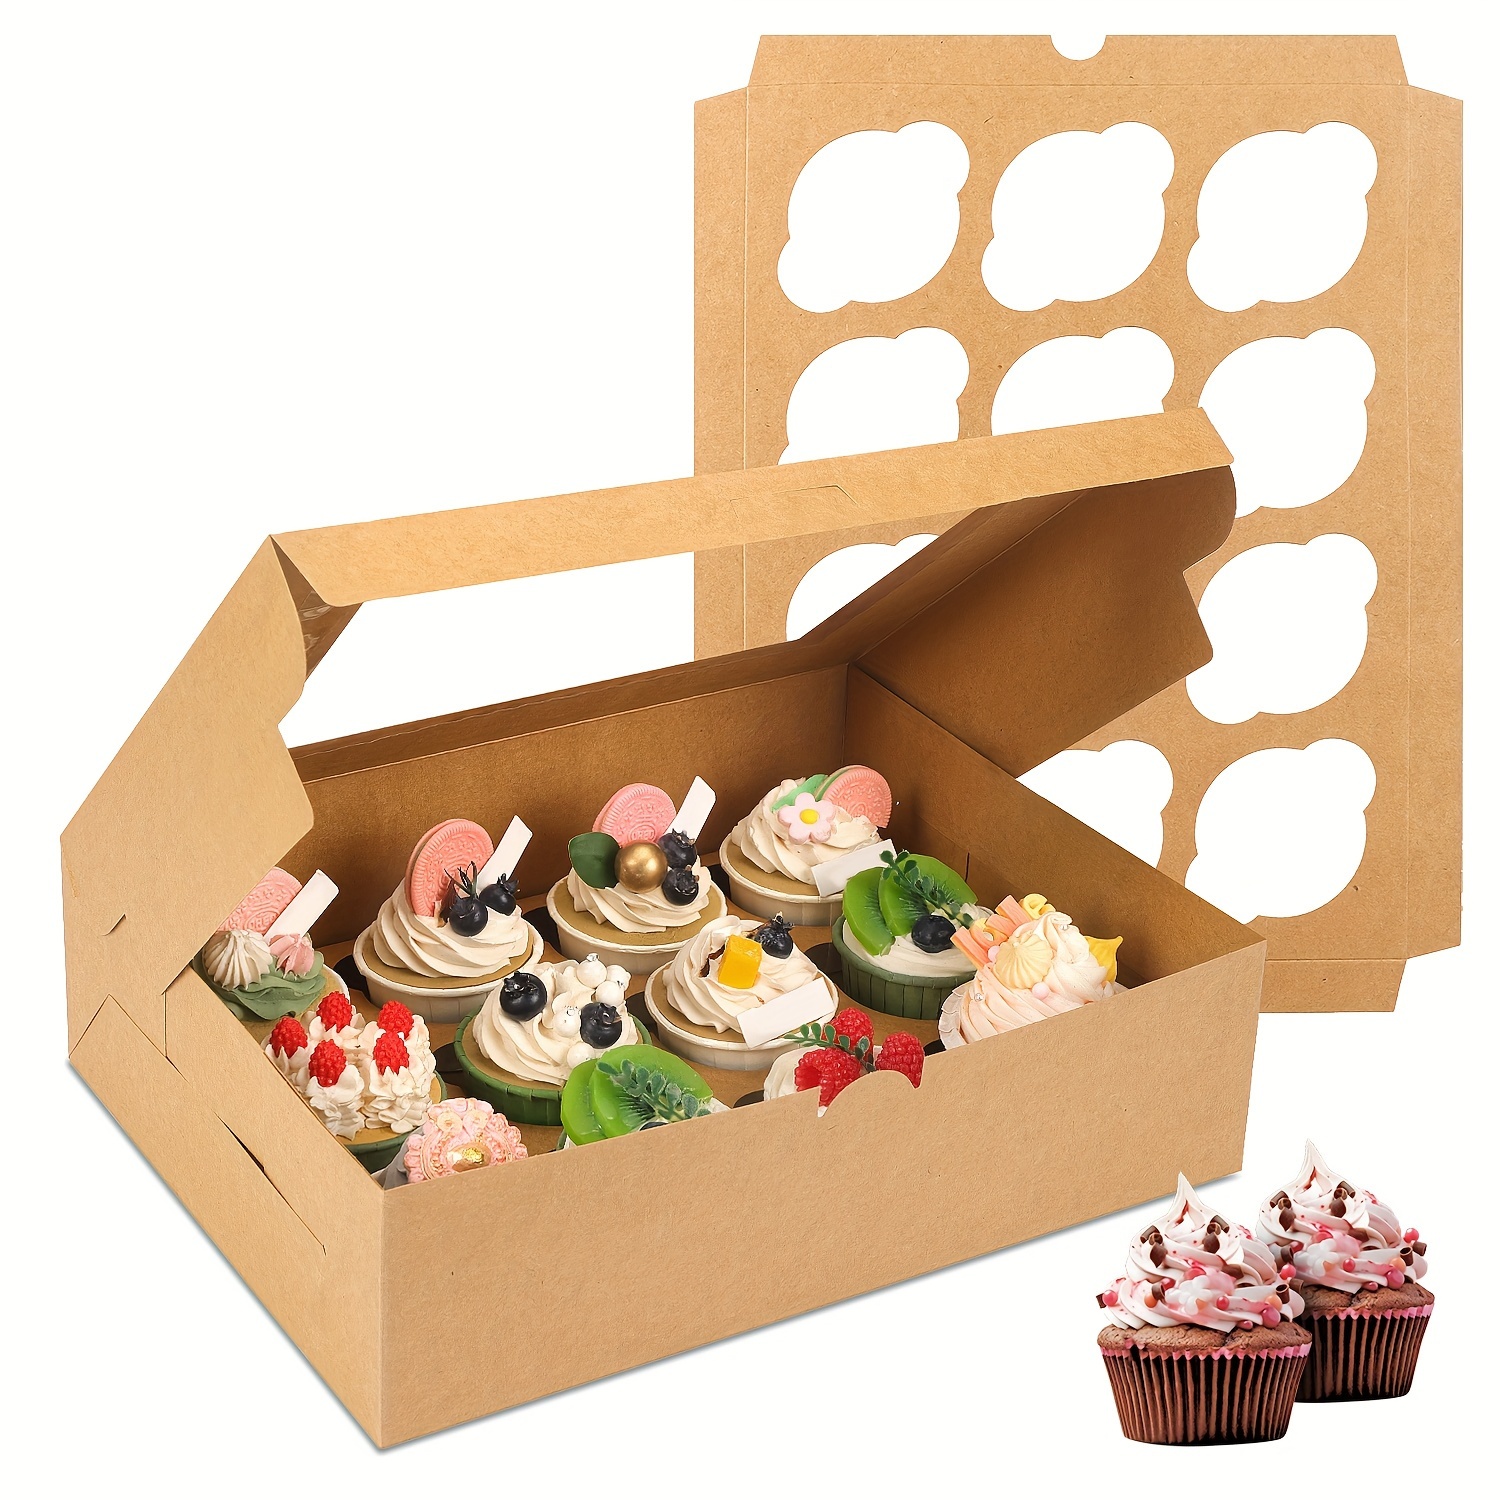 

40 Pcs Cupcake Boxes, 13×10×3.5 Inches, Each Can Hold 12 Cupcakes, Cupcake Containers Bakery Holders With Windows And Inserts To Fit Muffins, Cupcake Carrier For , For Cupcakes, Muffins, Pastries